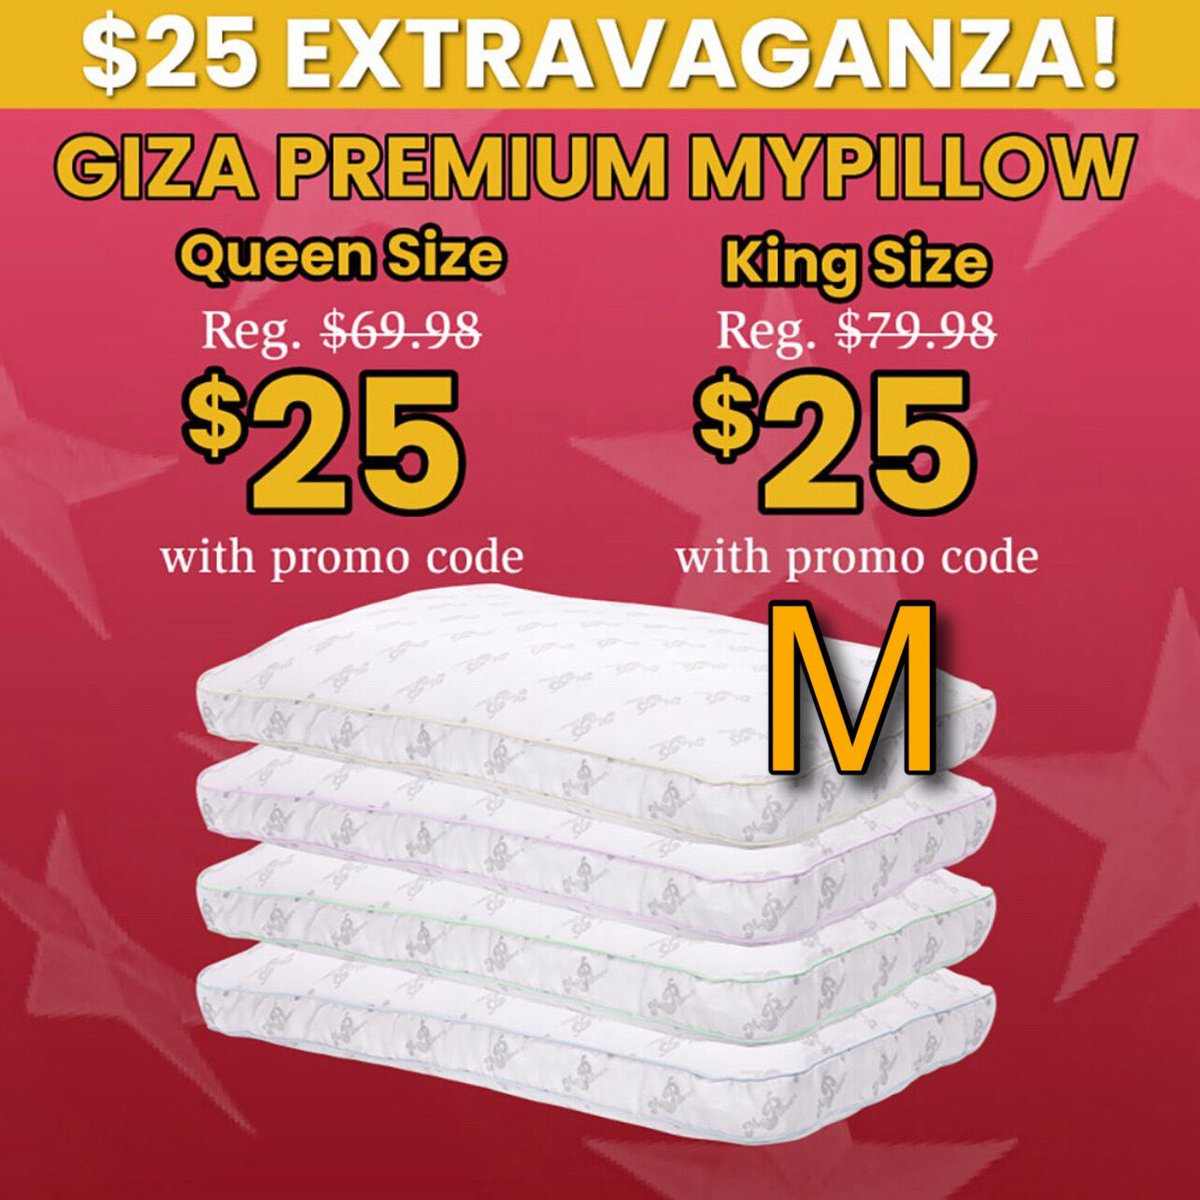 🚨Deal alert!🚨 Treat yourself like royalty with our $25 Extravaganza on King or Queen Giza Premium #MyPillow! When you use promo code 👉M👈 for a discount on the most comfortable pillows you'll ever experience. Don't miss out on this amazing deal, get yours today!…